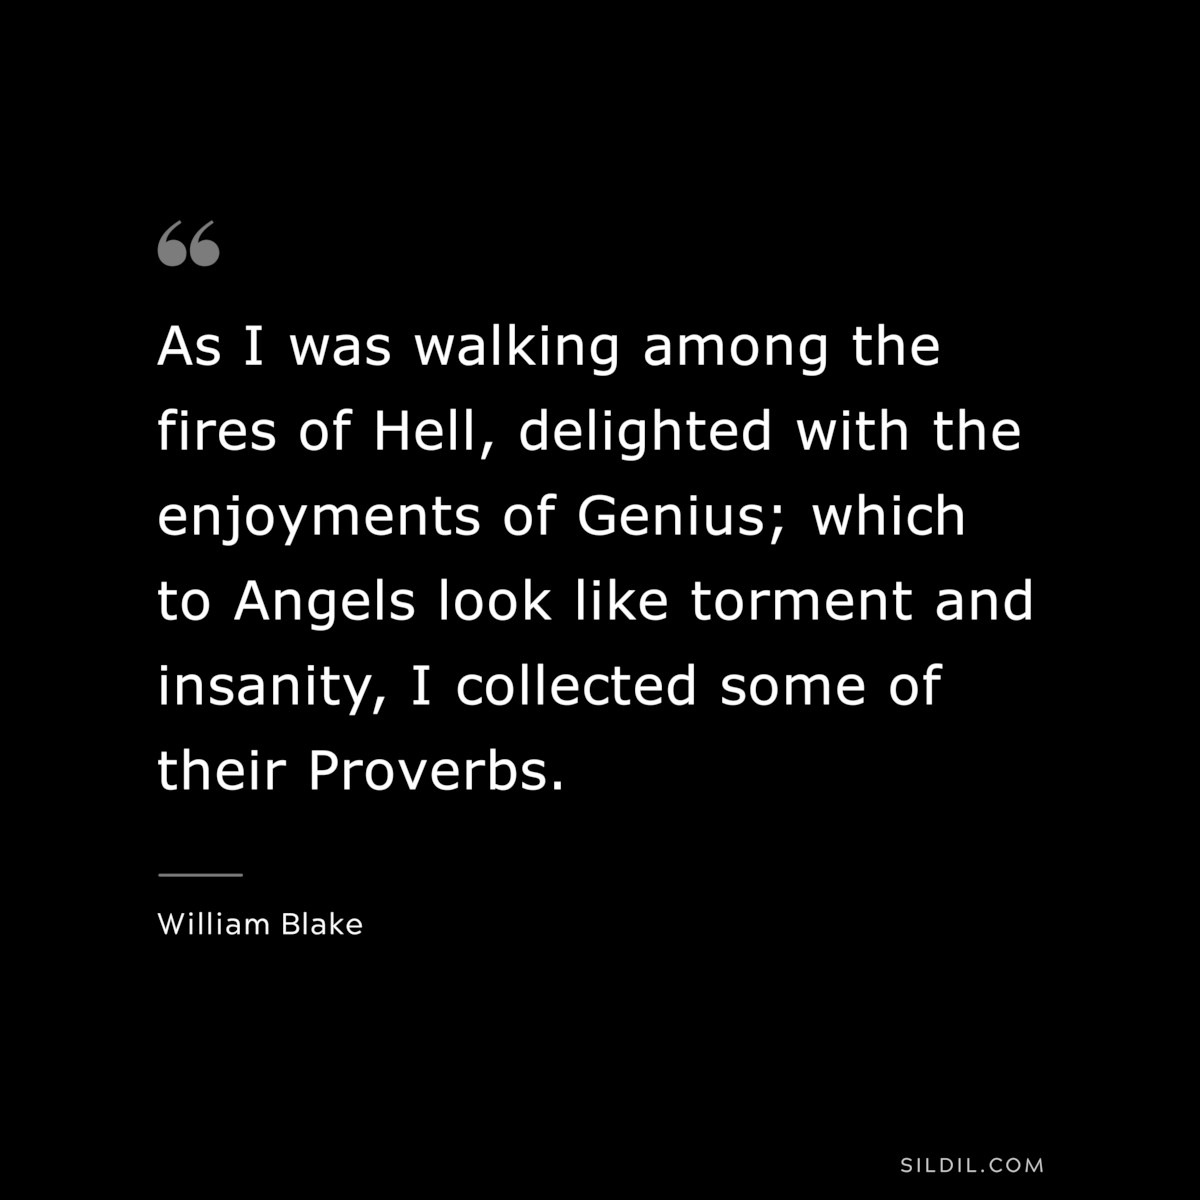 As I was walking among the fires of Hell, delighted with the enjoyments of Genius; which to Angels look like torment and insanity, I collected some of their Proverbs. ― William Blake